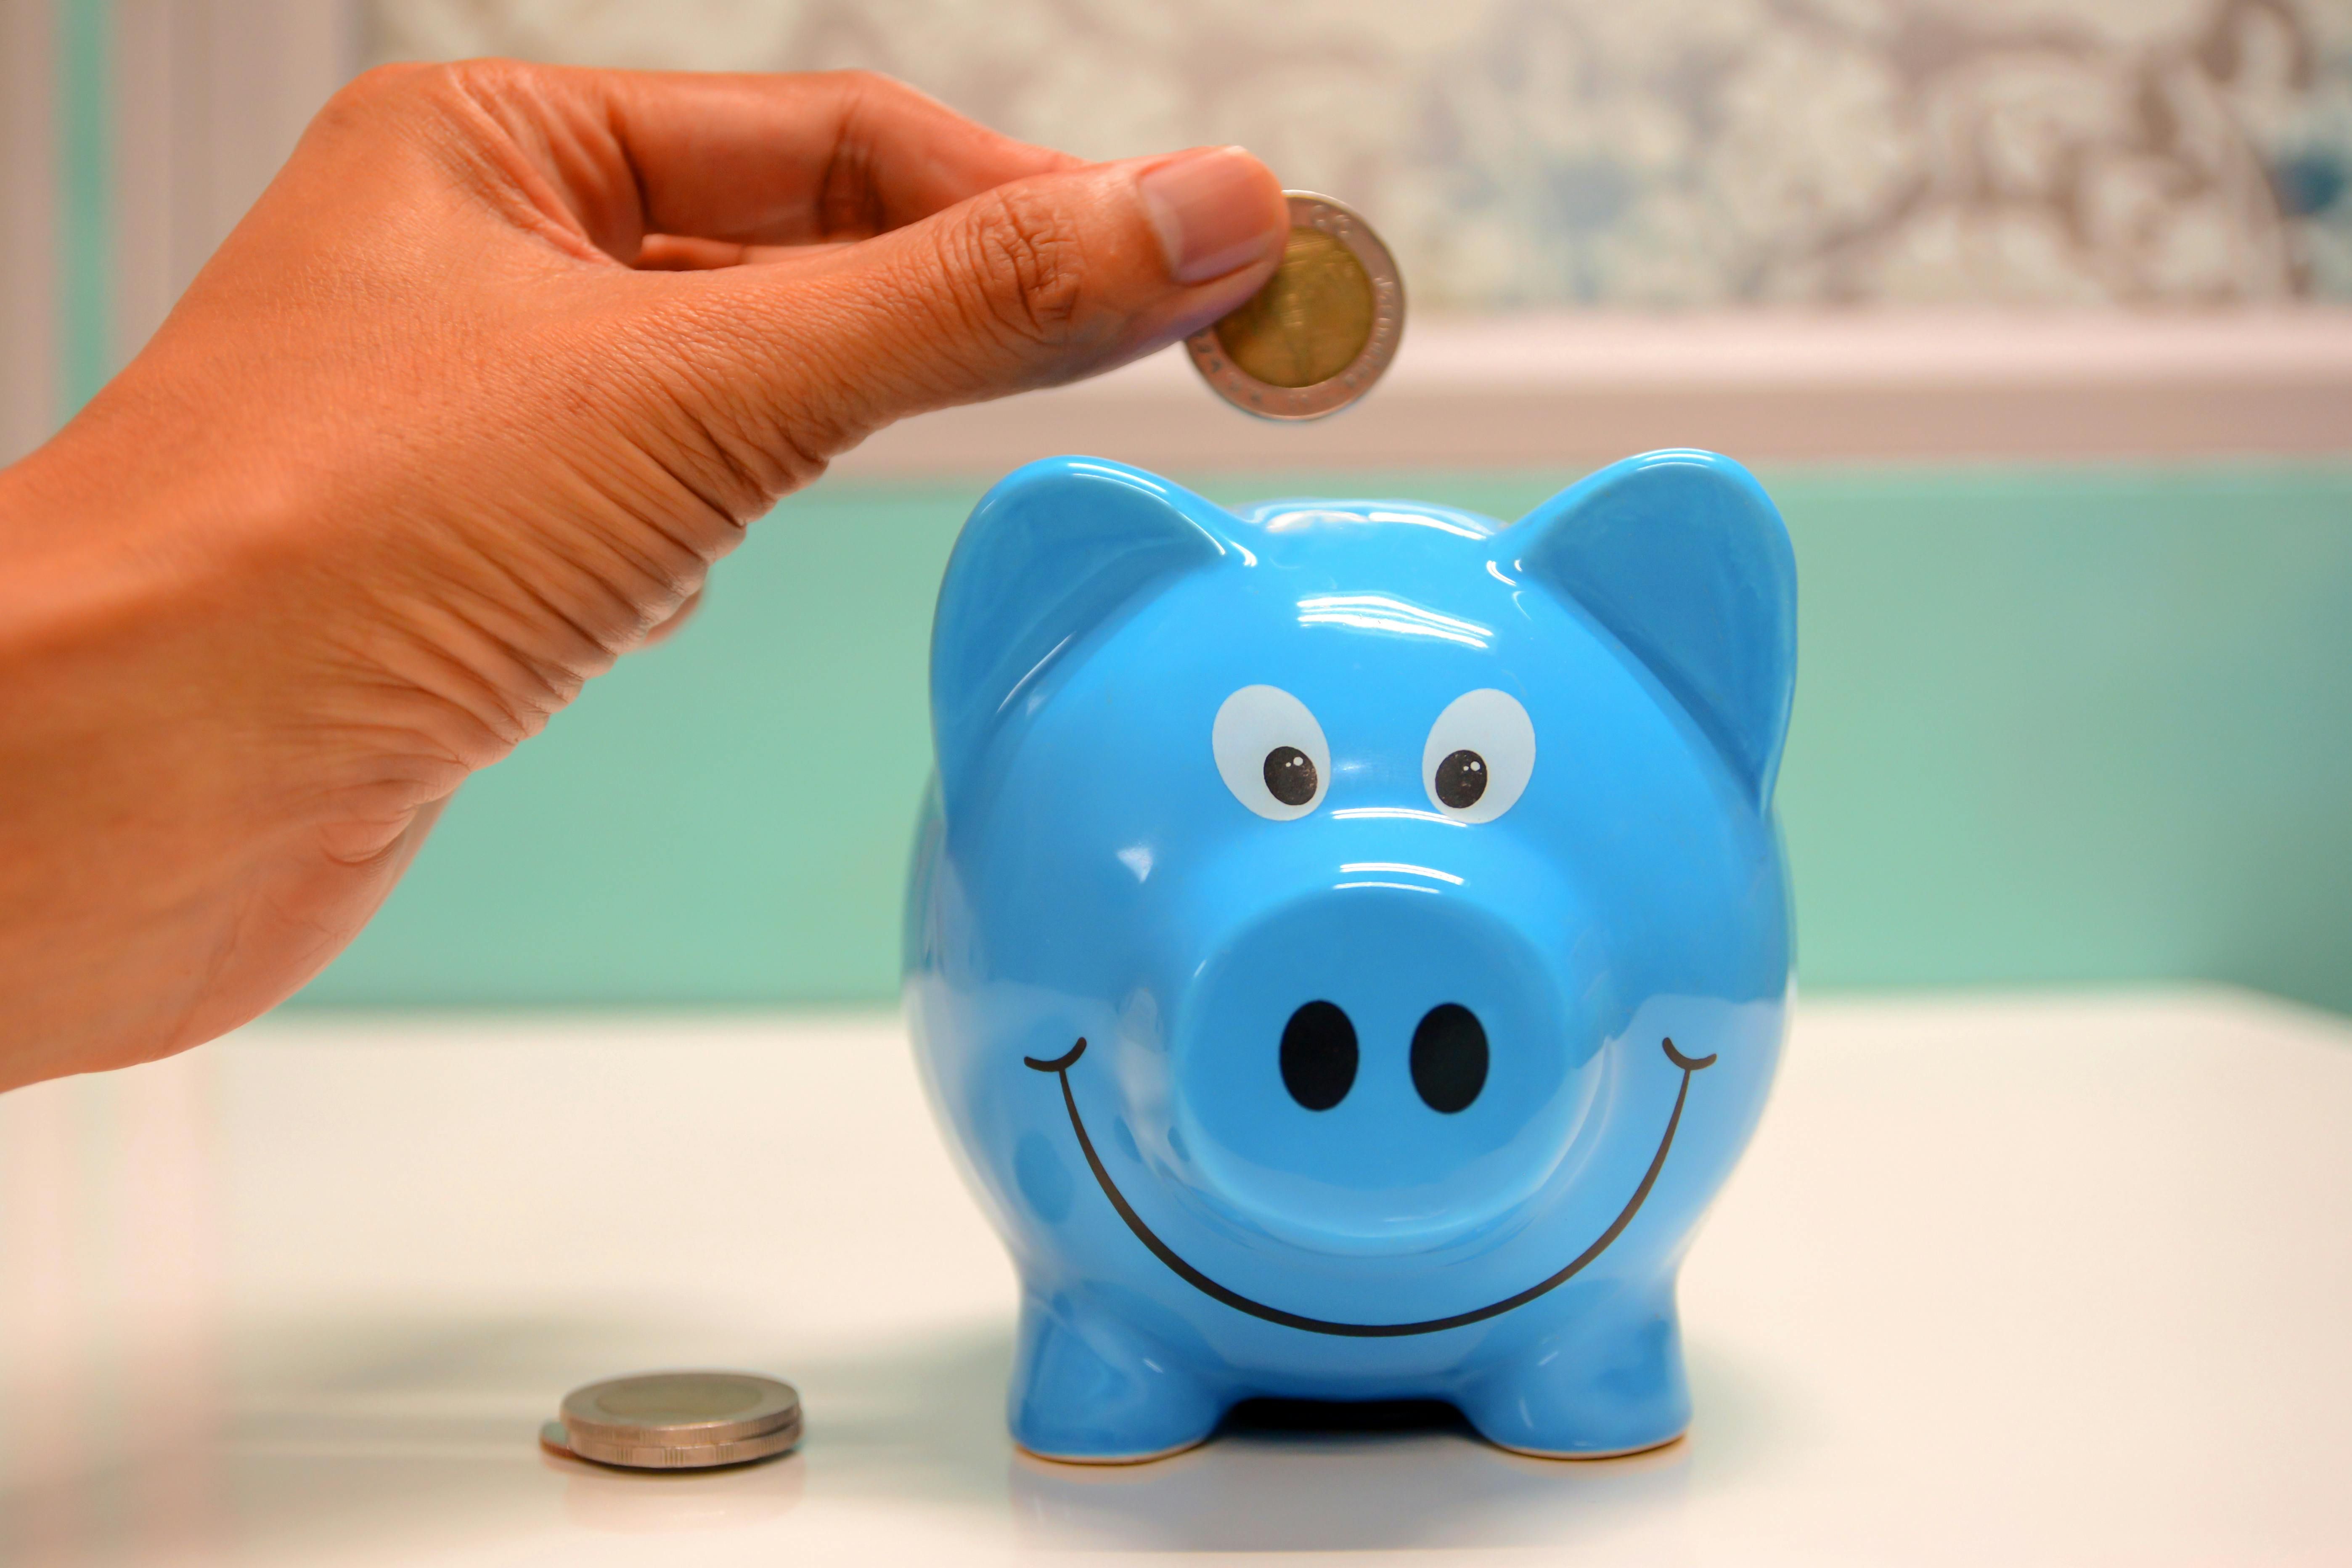 The picture shows a blue piggy bank and a hand throwing a coin into it. The piggy bank to be filled symbolizes the financial support for the provision of medical aids. 